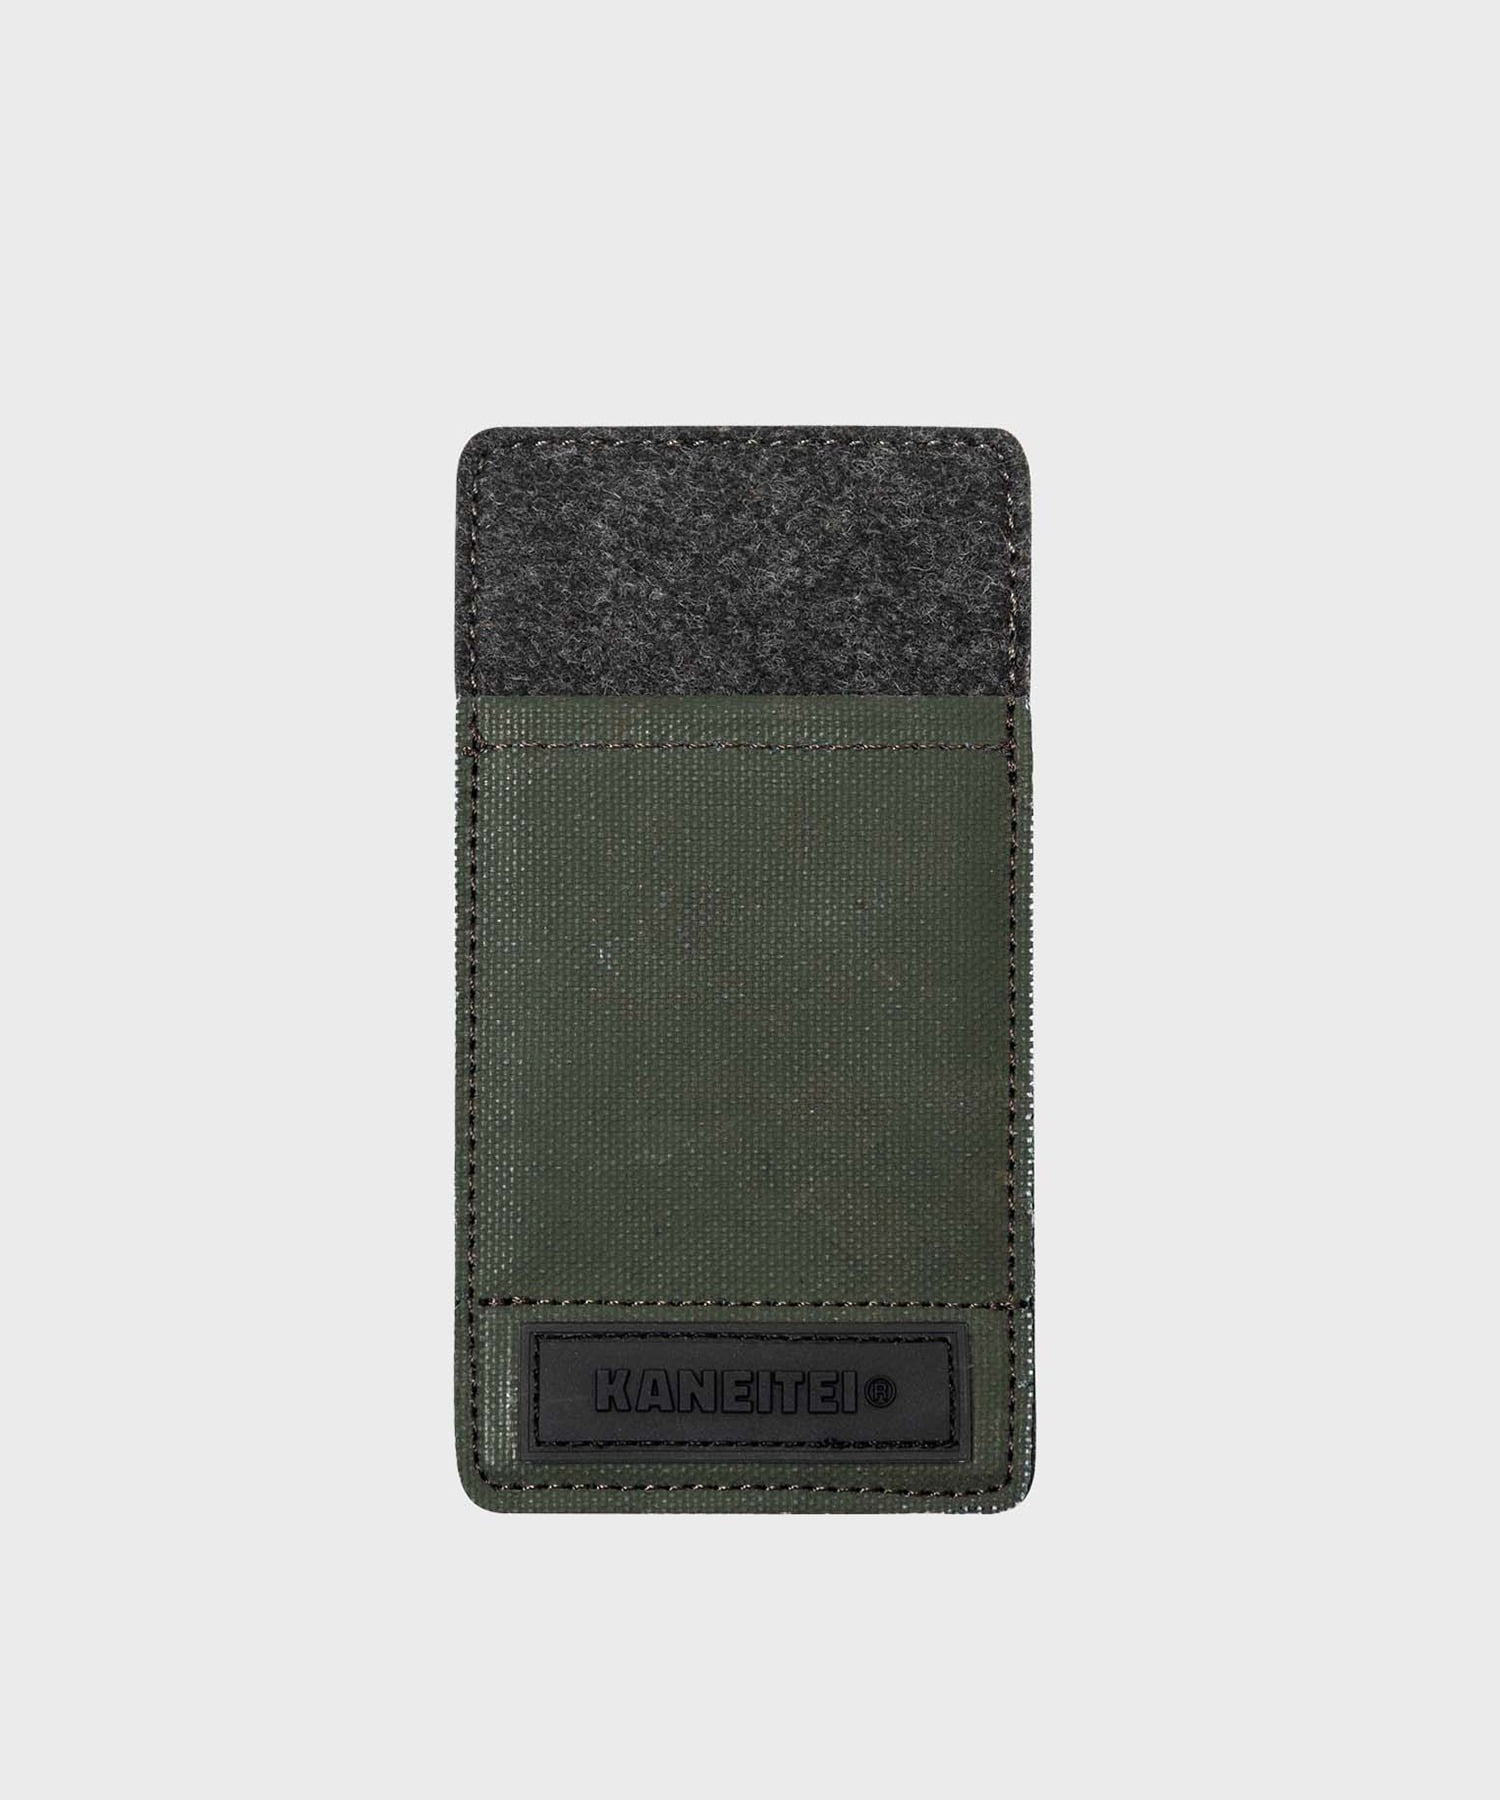 KNT X PNF CARD HOLDER (OLIVE DRAB) / UPCYCLED